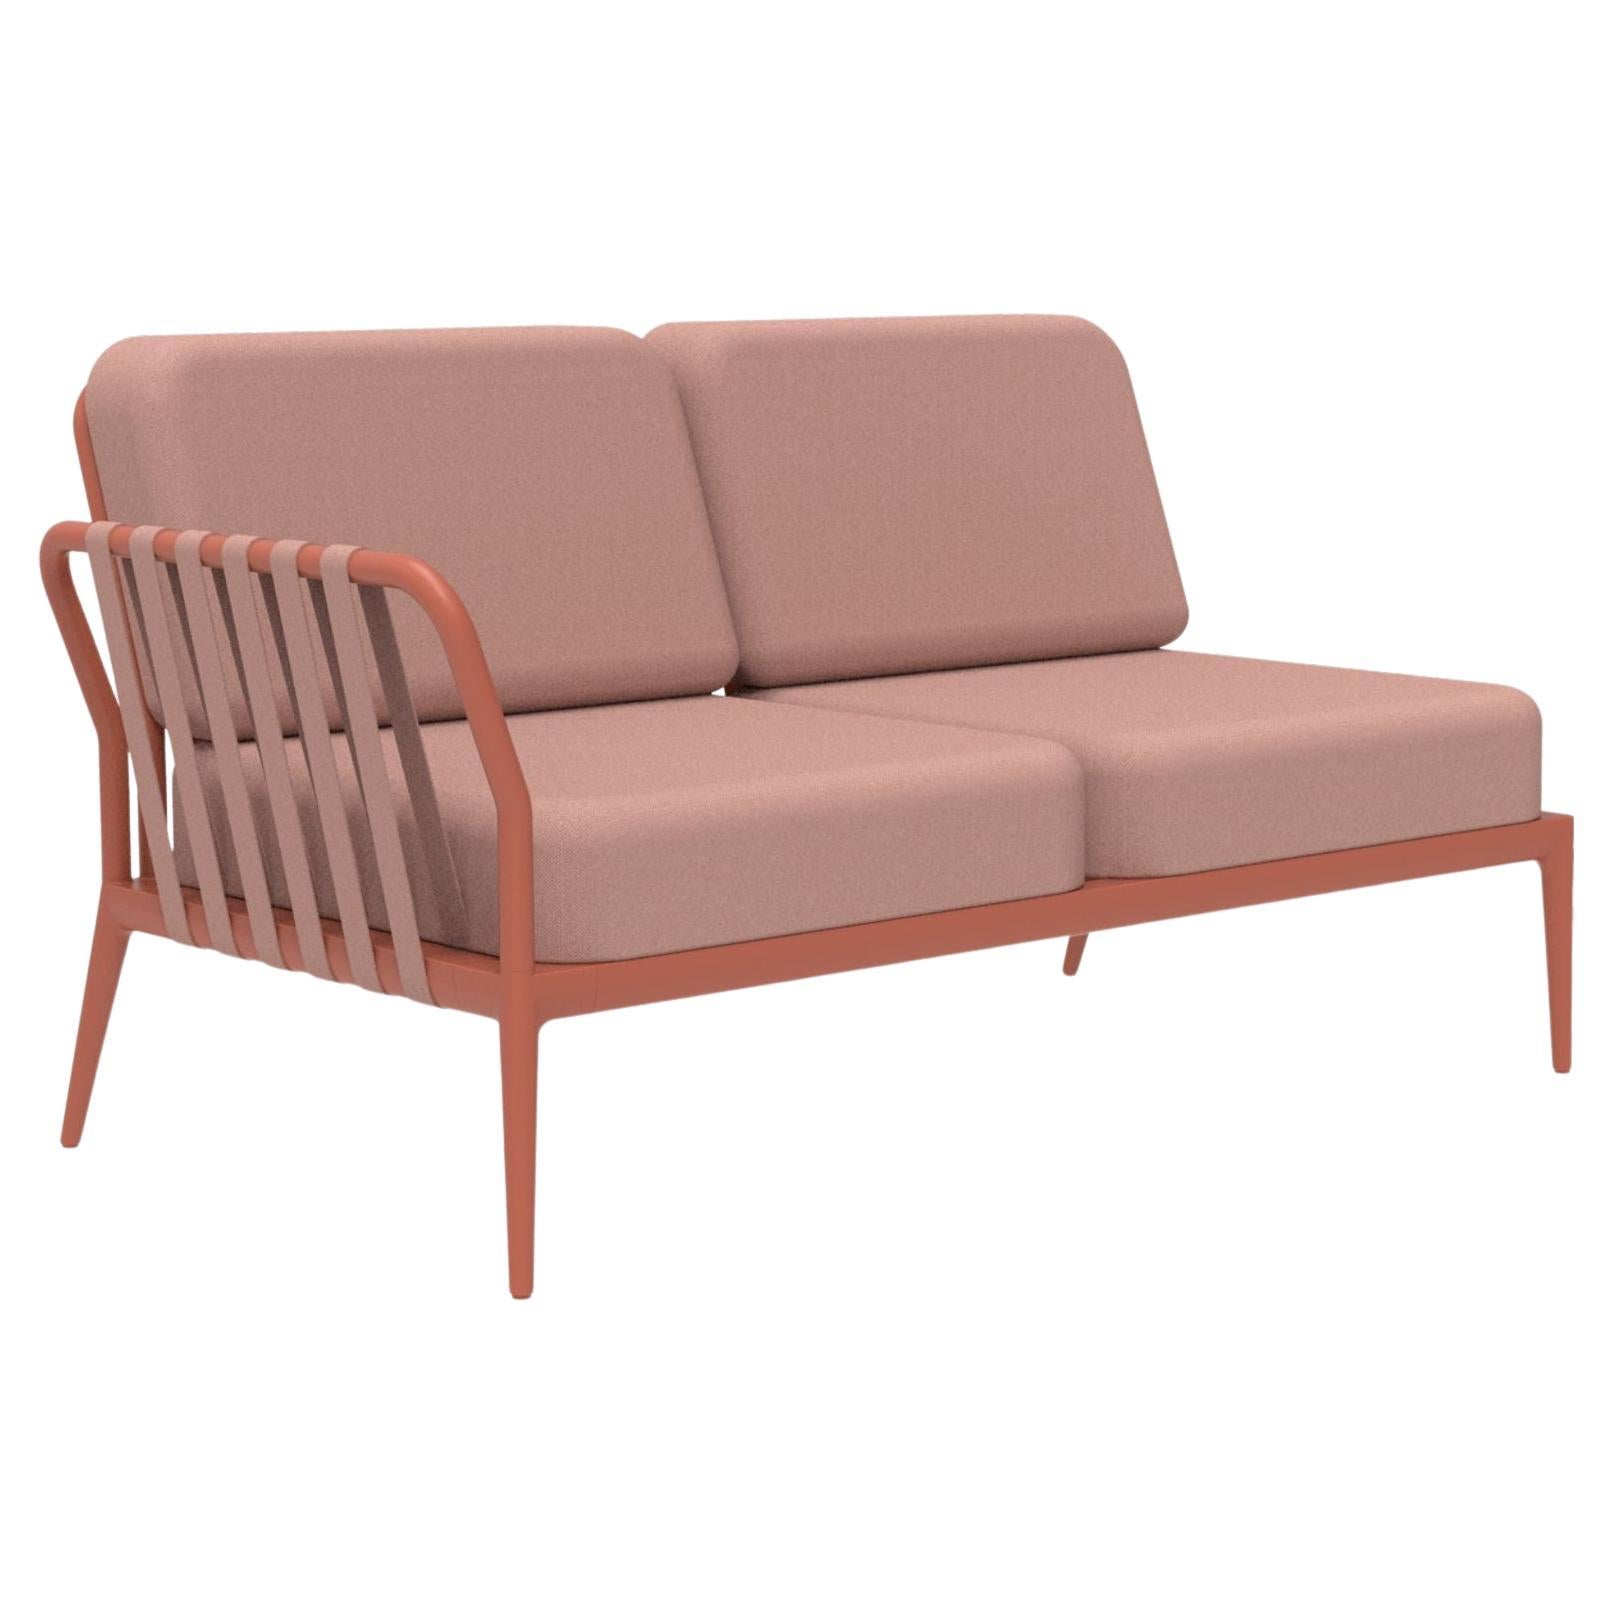 Ribbons Salmon Double Right Modular Sofa by Mowee For Sale